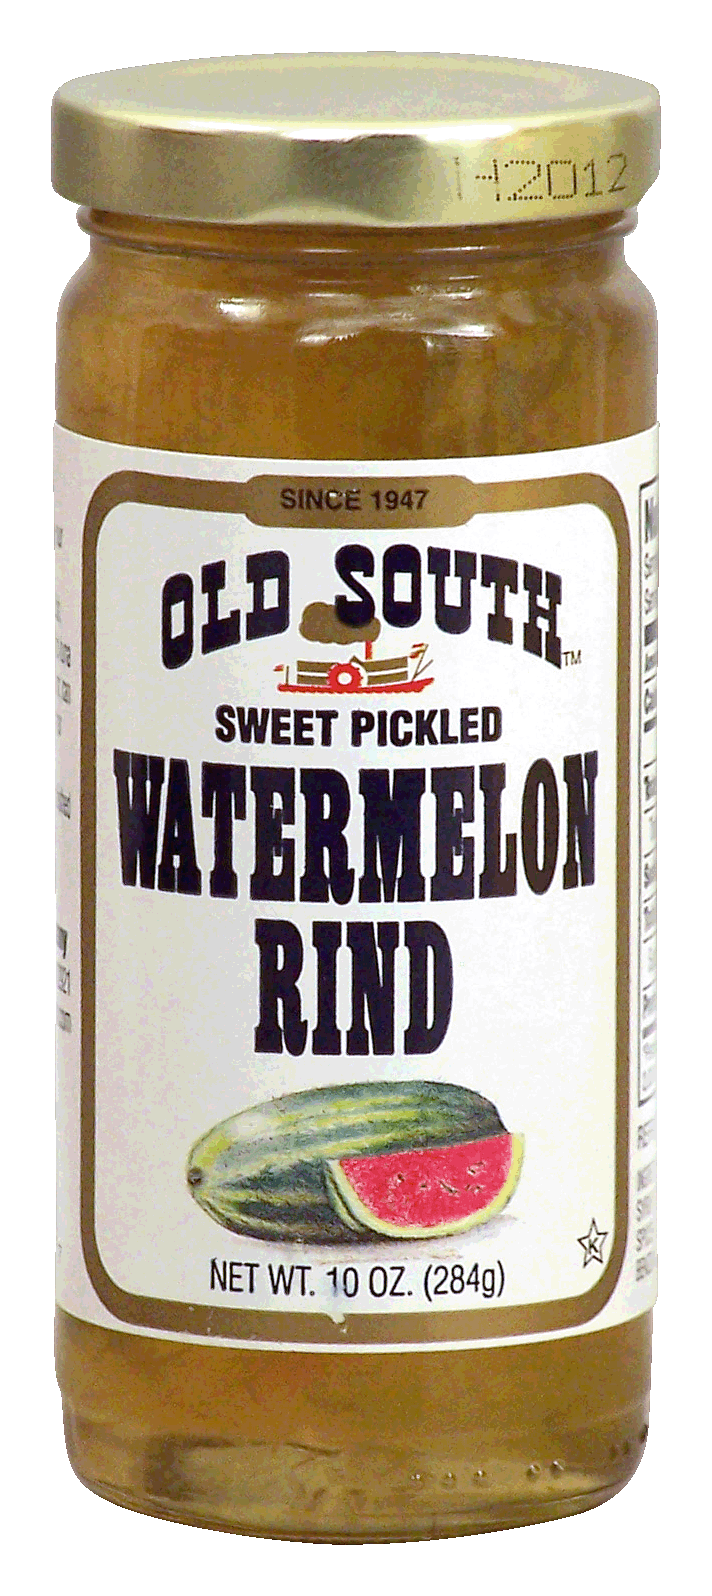 Groceries-Express.com Product Infomation for Old South watermelon rind ...